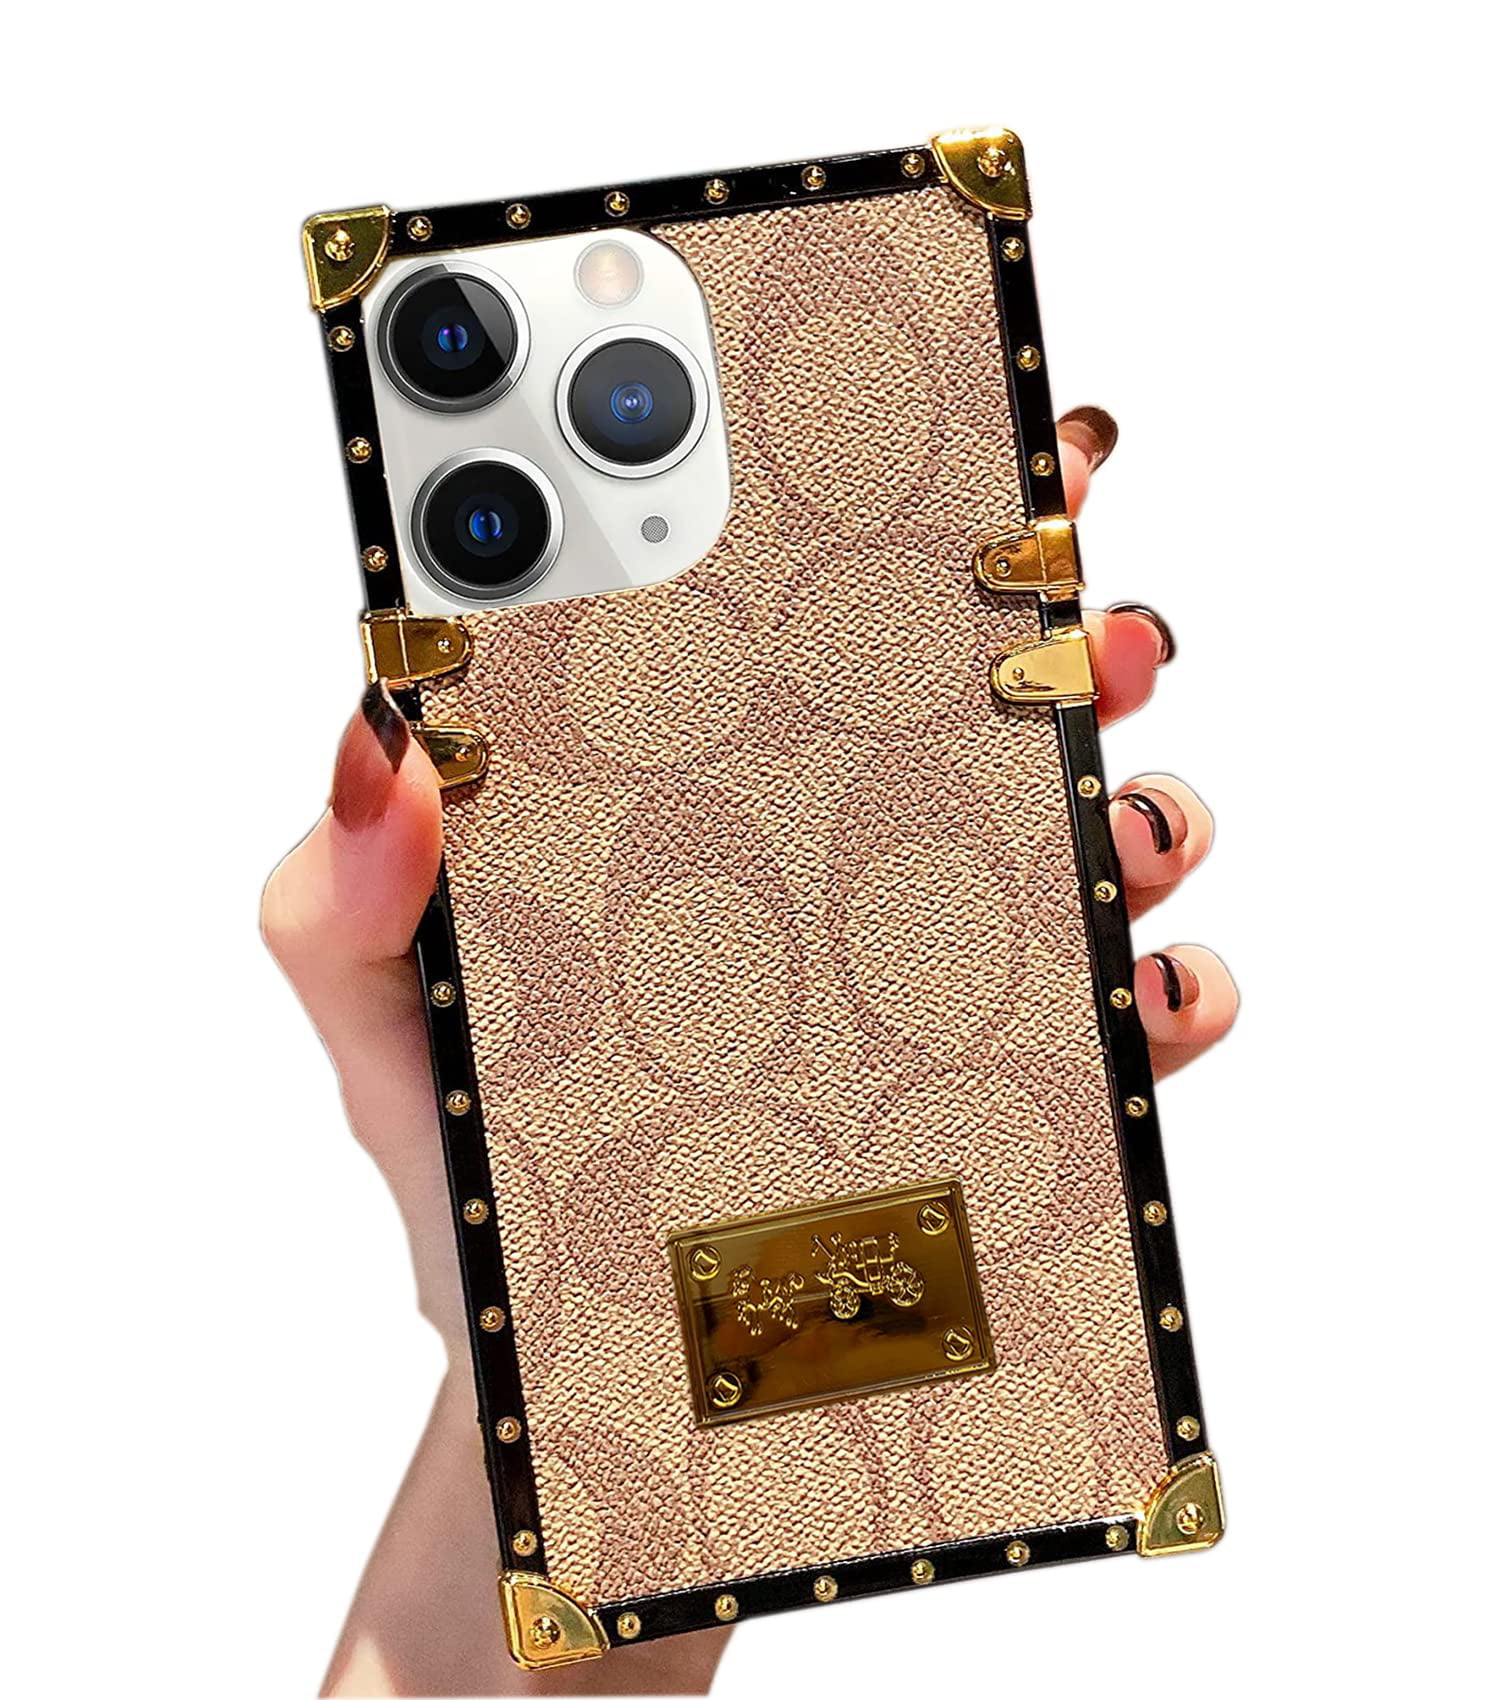 Designer Case Compatible with iPhone 12 Pro,Luxury Aesthetic Classic  Pattern Leather Back Cover Soft Frame Metal nameplate Cute Light Brown